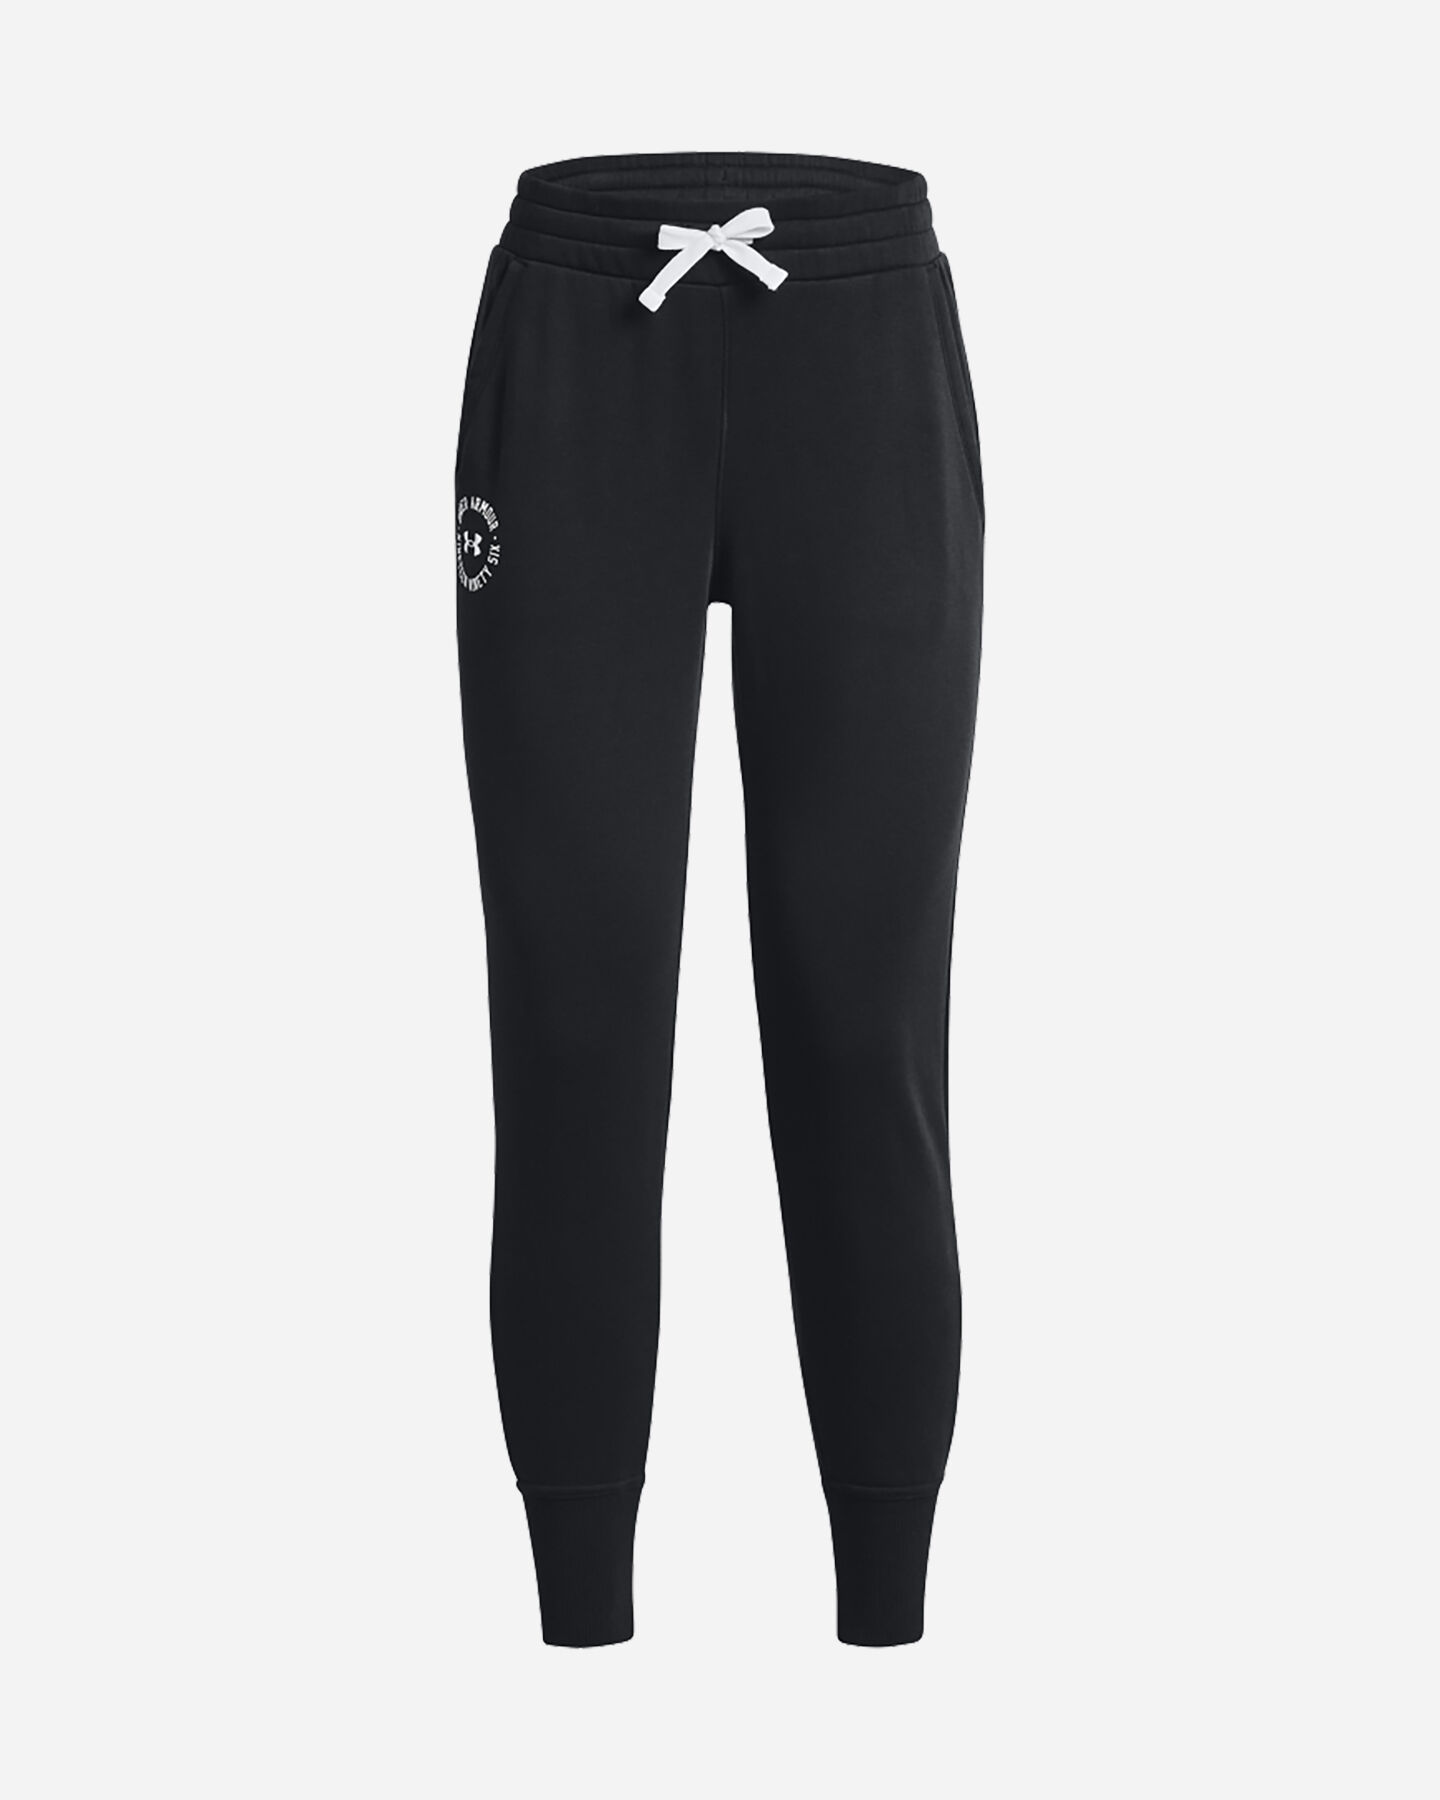  Pantalone UNDER ARMOUR RIVAL FLEECE CRESTS W S5458906|0001|XS scatto 0